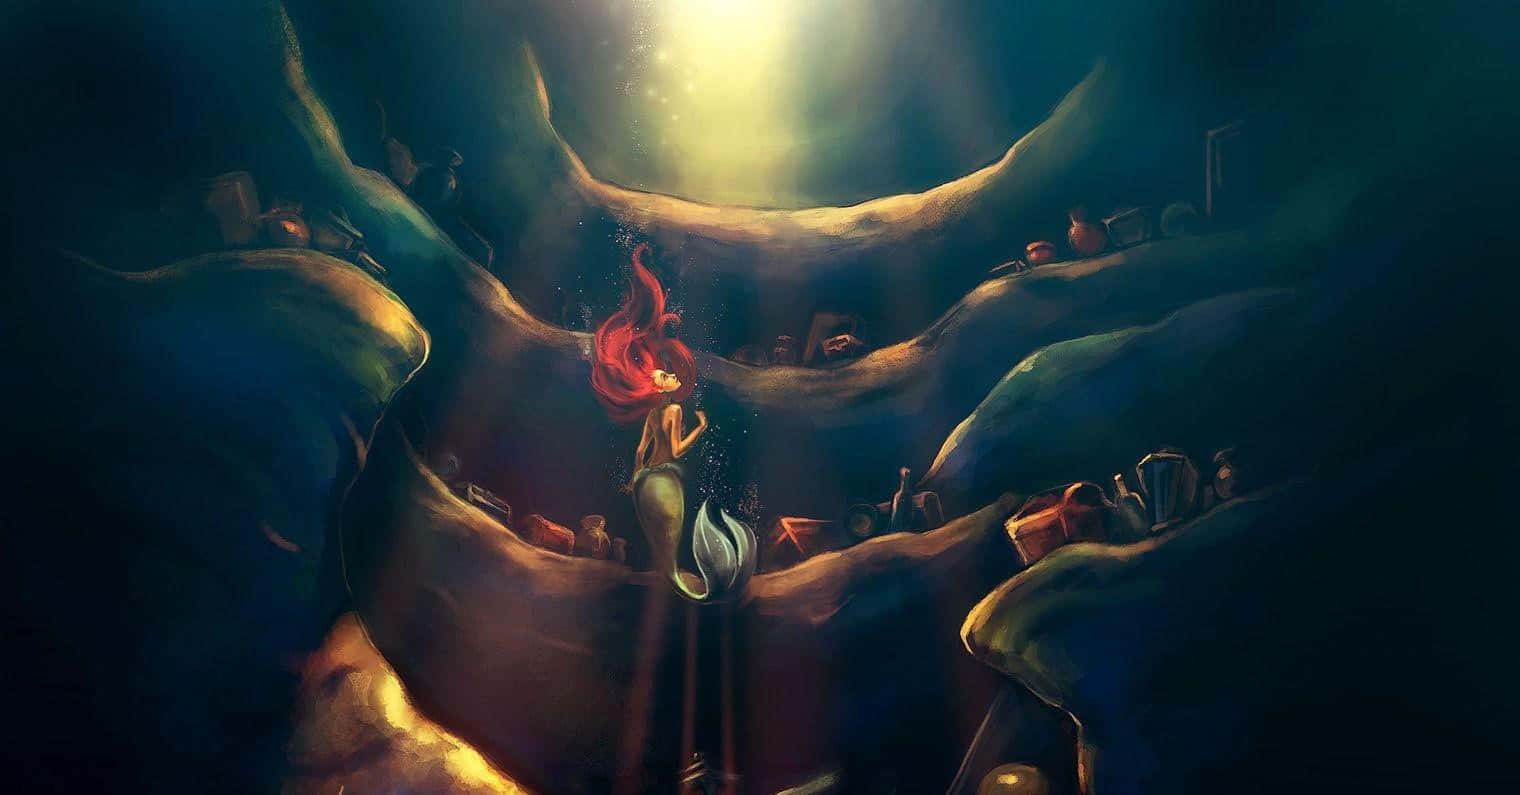 A Magical Moment From Disney's The Little Mermaid Background